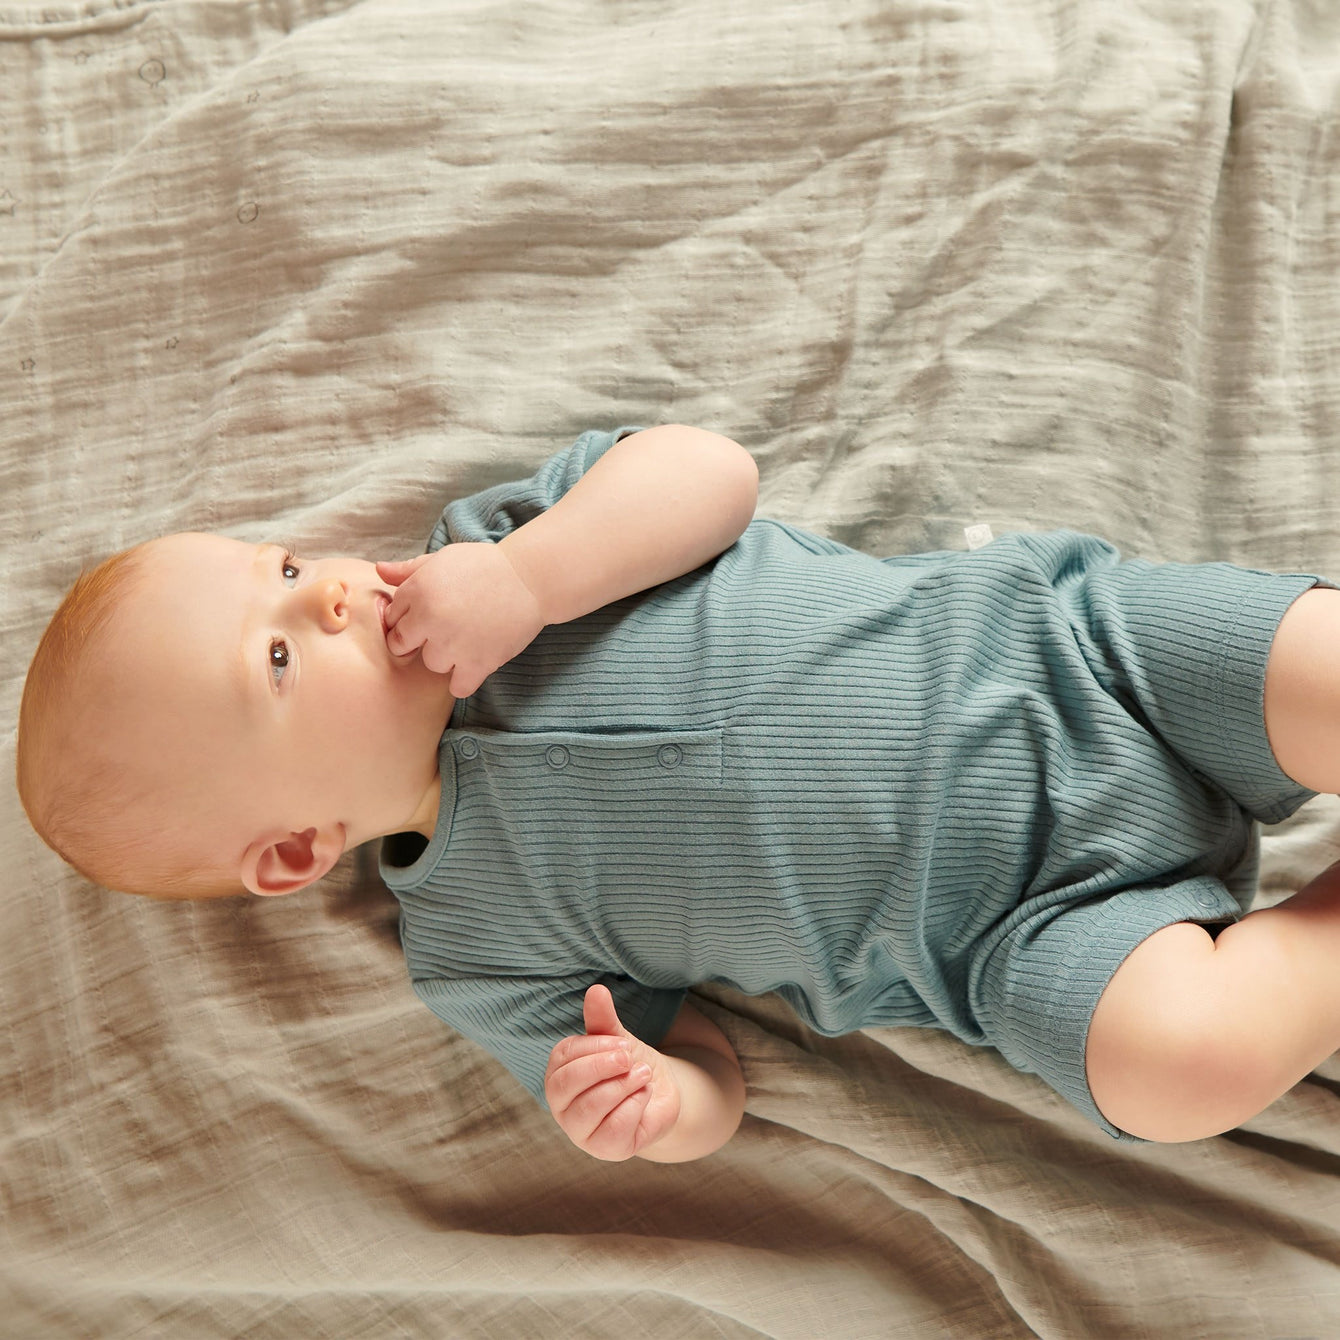 What should a baby wear to sleep in summer?